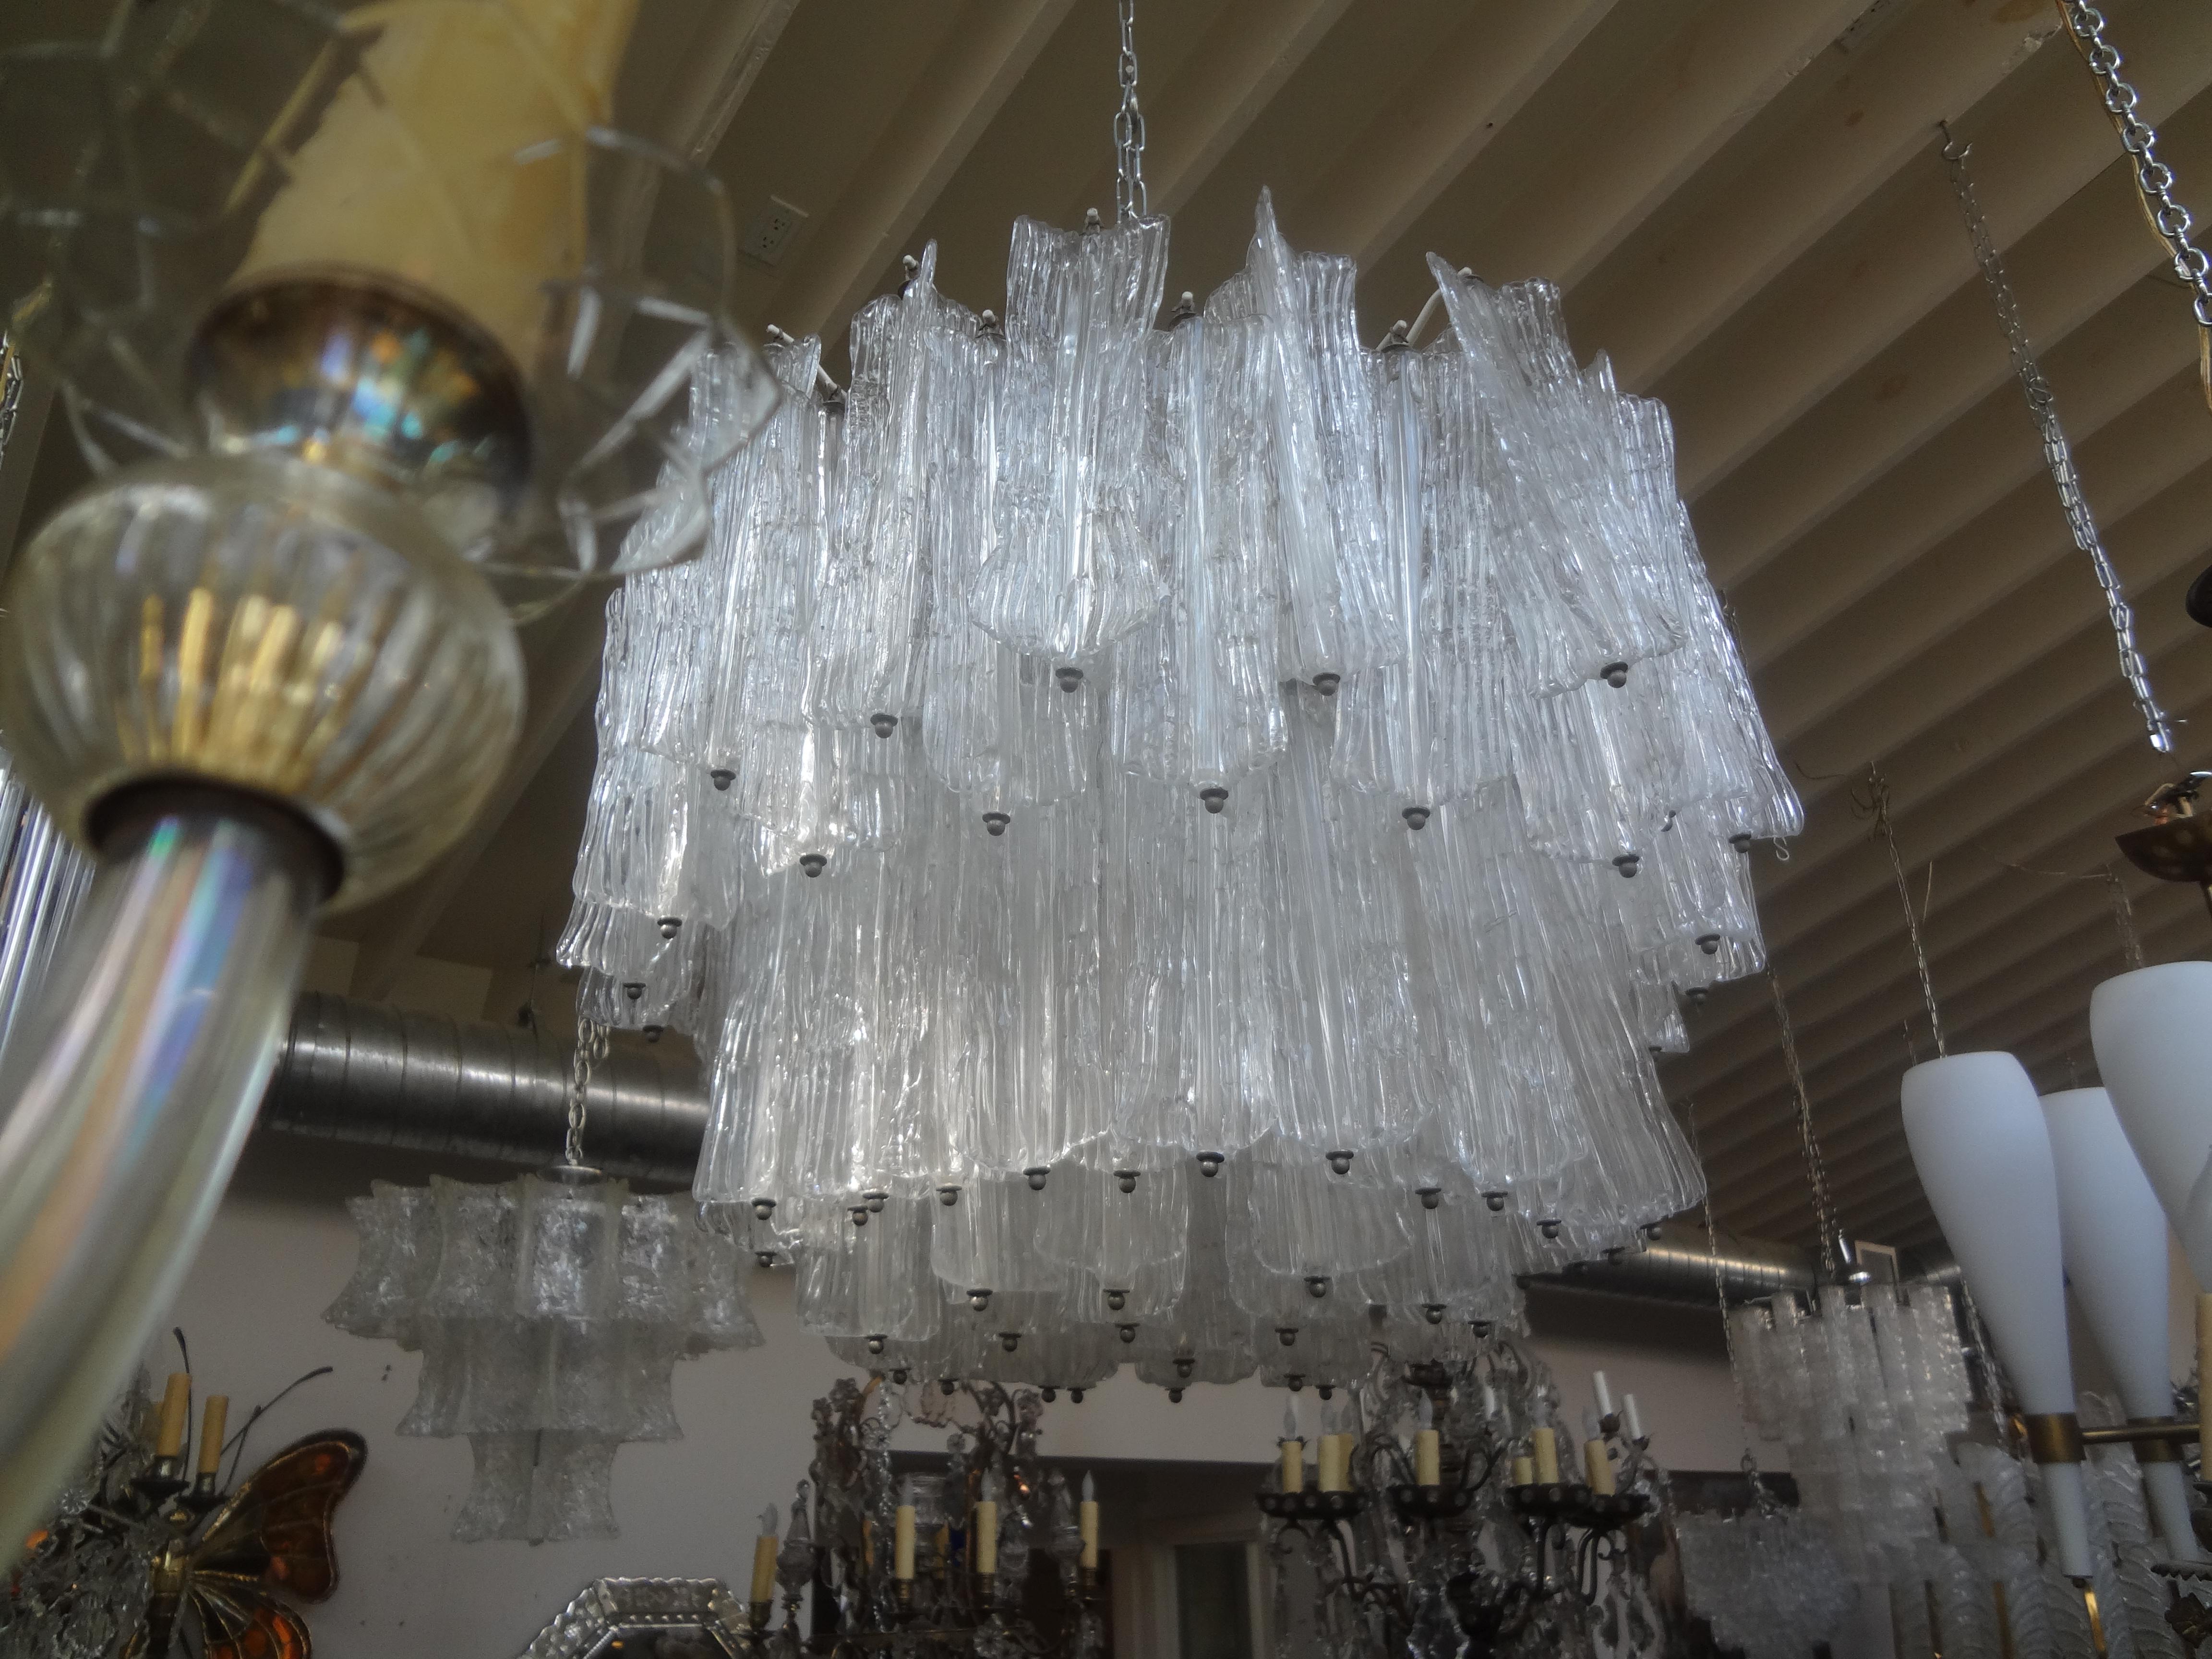 Mid-Century Modern Italian Murano glass chandelier attributed to Venini.
Our stunning Murano midcentury Murano chandelier is attributed to Toni Zuccheri for Venini.
This large Murano glass chandelier with unusually shaped blocks has been newly wired